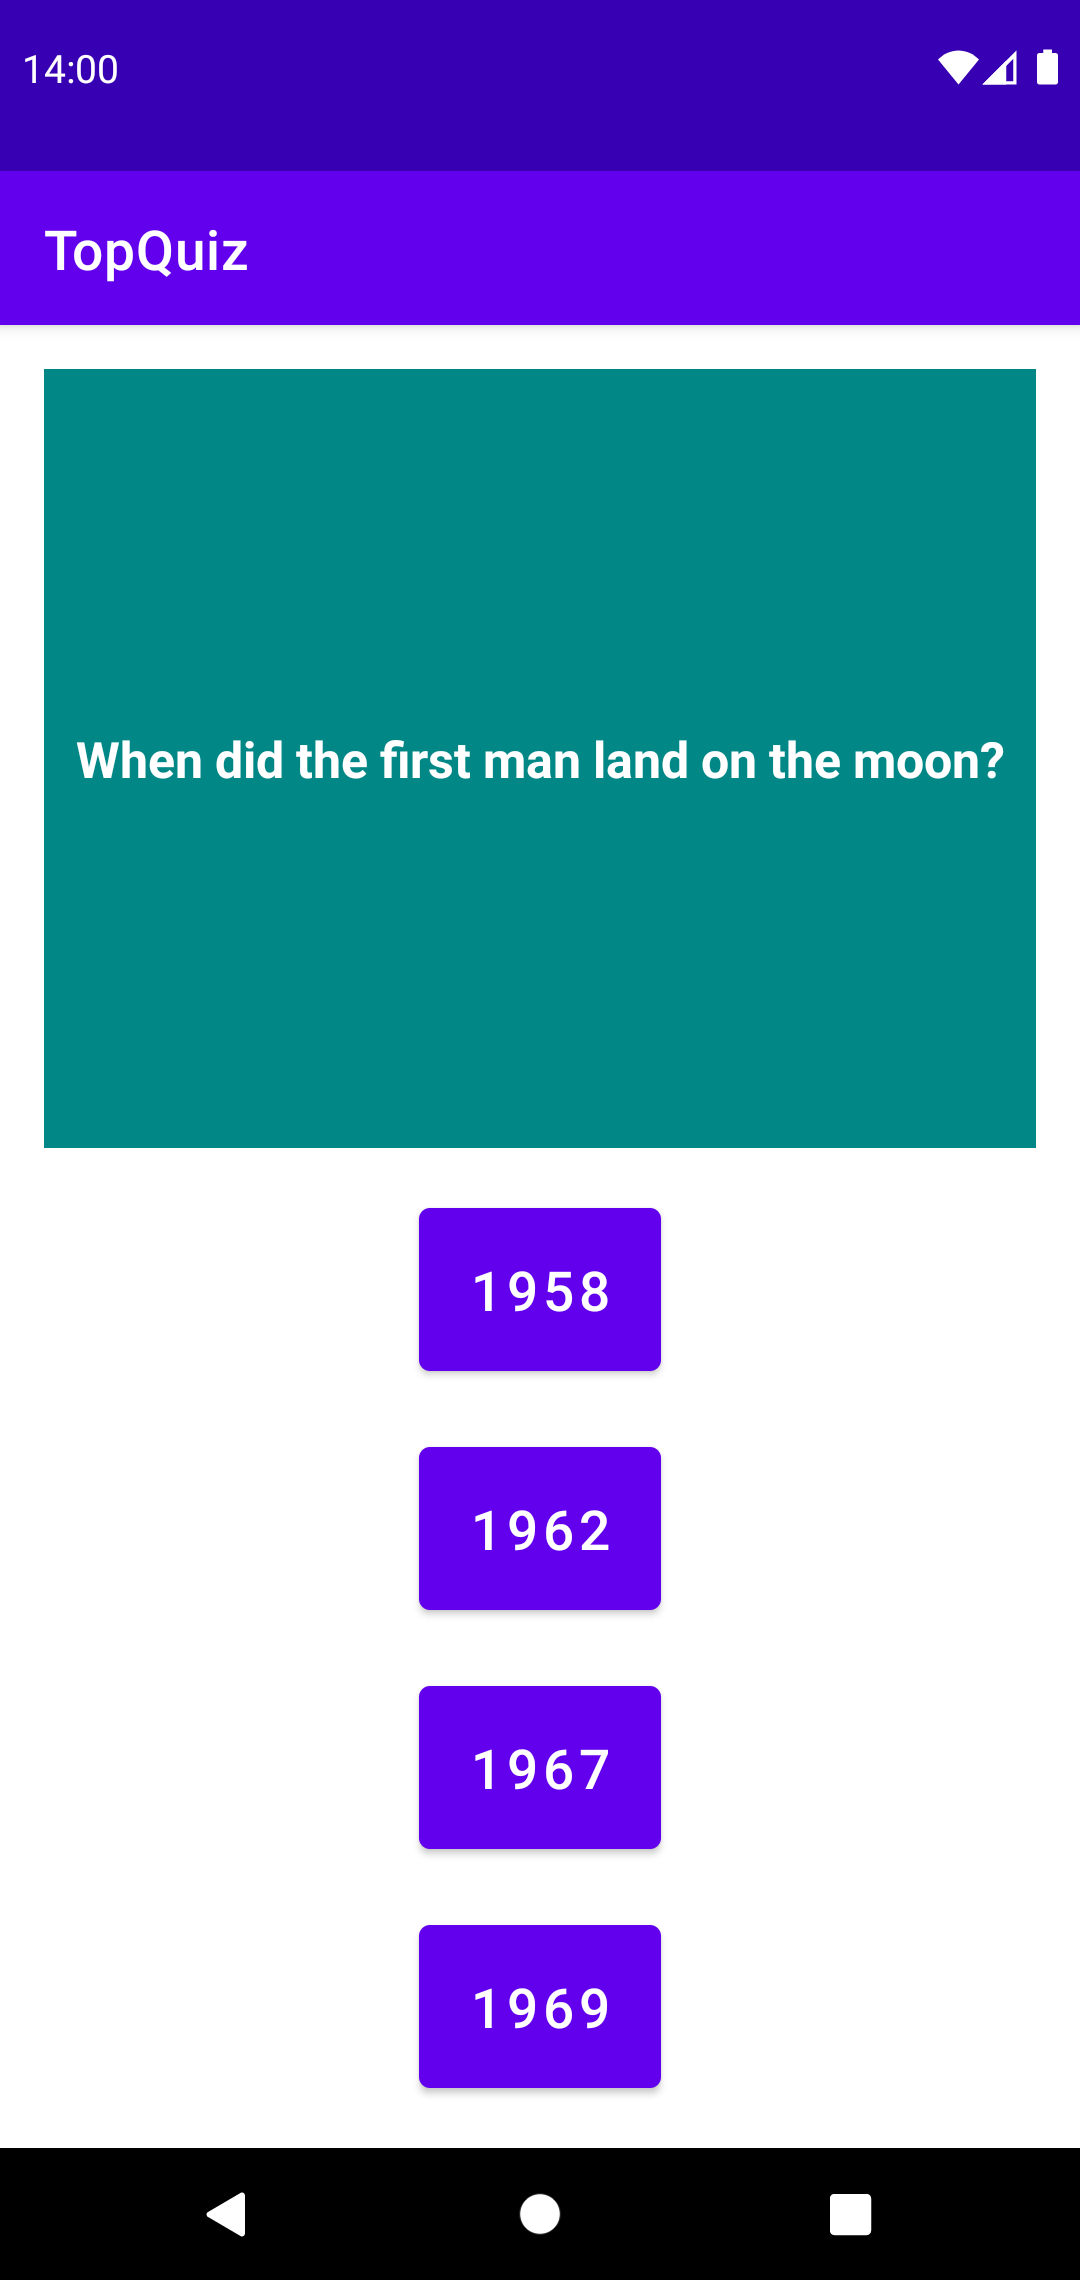 When did the first man land on the moon: 1958, 1962, 1967, or 1969?